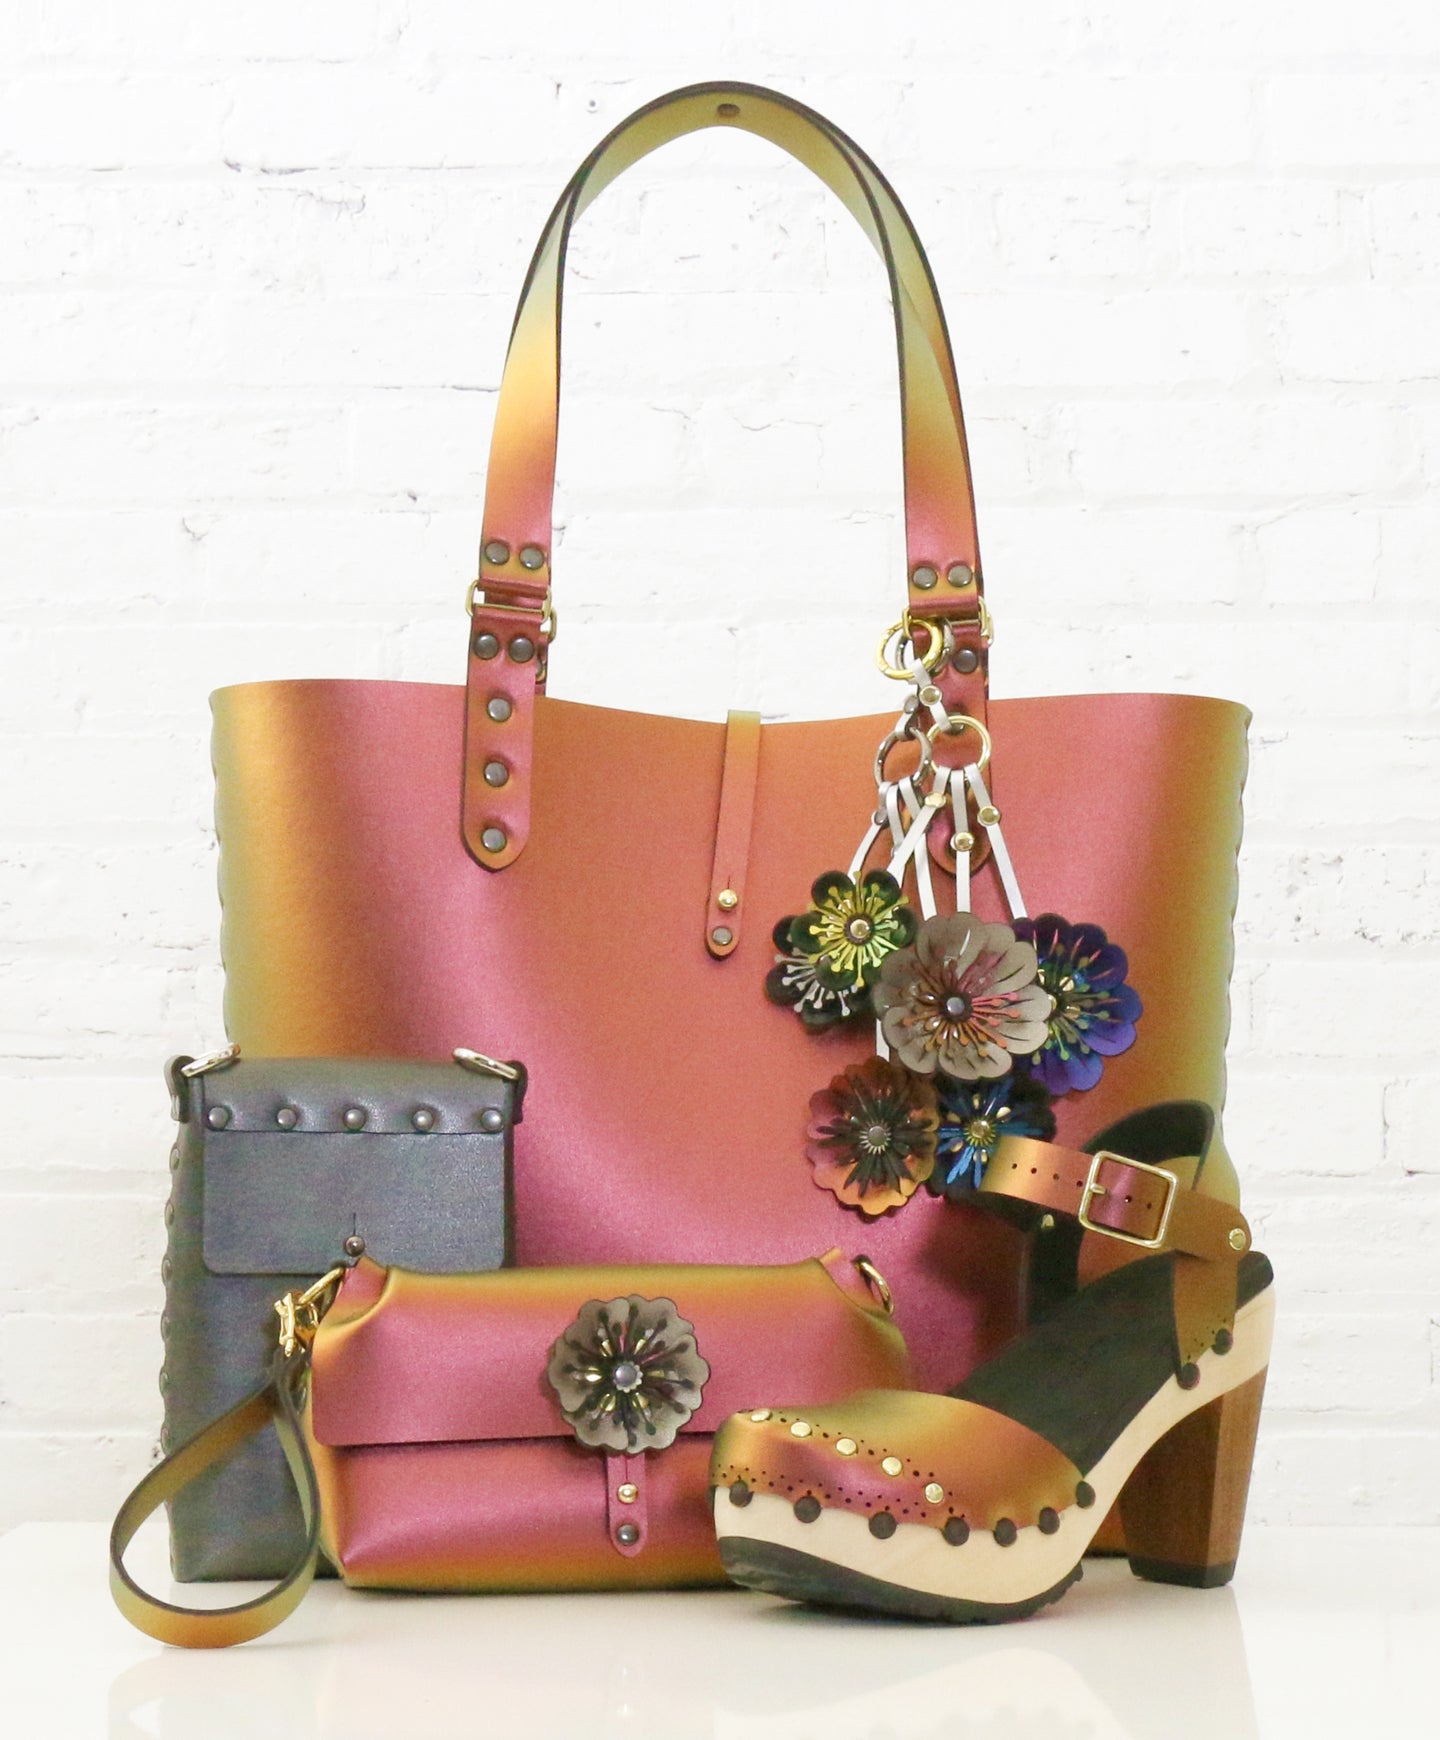 A product image featuring a tote with flower charms, wristlet, and heeled clogs, all in iridescent red, as well as a small bag in dark silver.